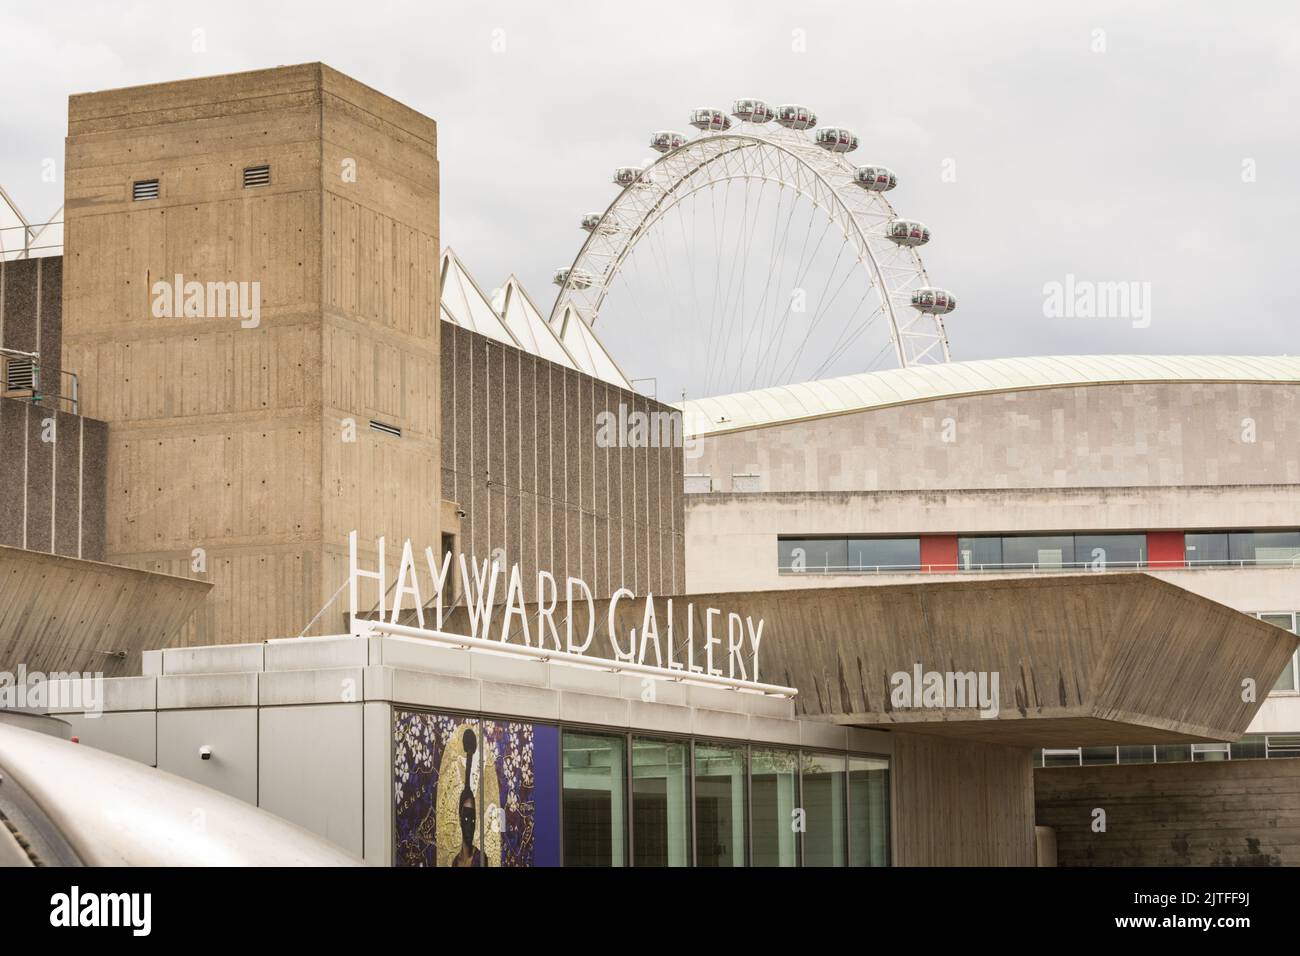 The Hayward Gallery and the Millenium Wheel (London Eye), Southbank Centre, Belvedere Road, London, SE1, UK Stock Photo